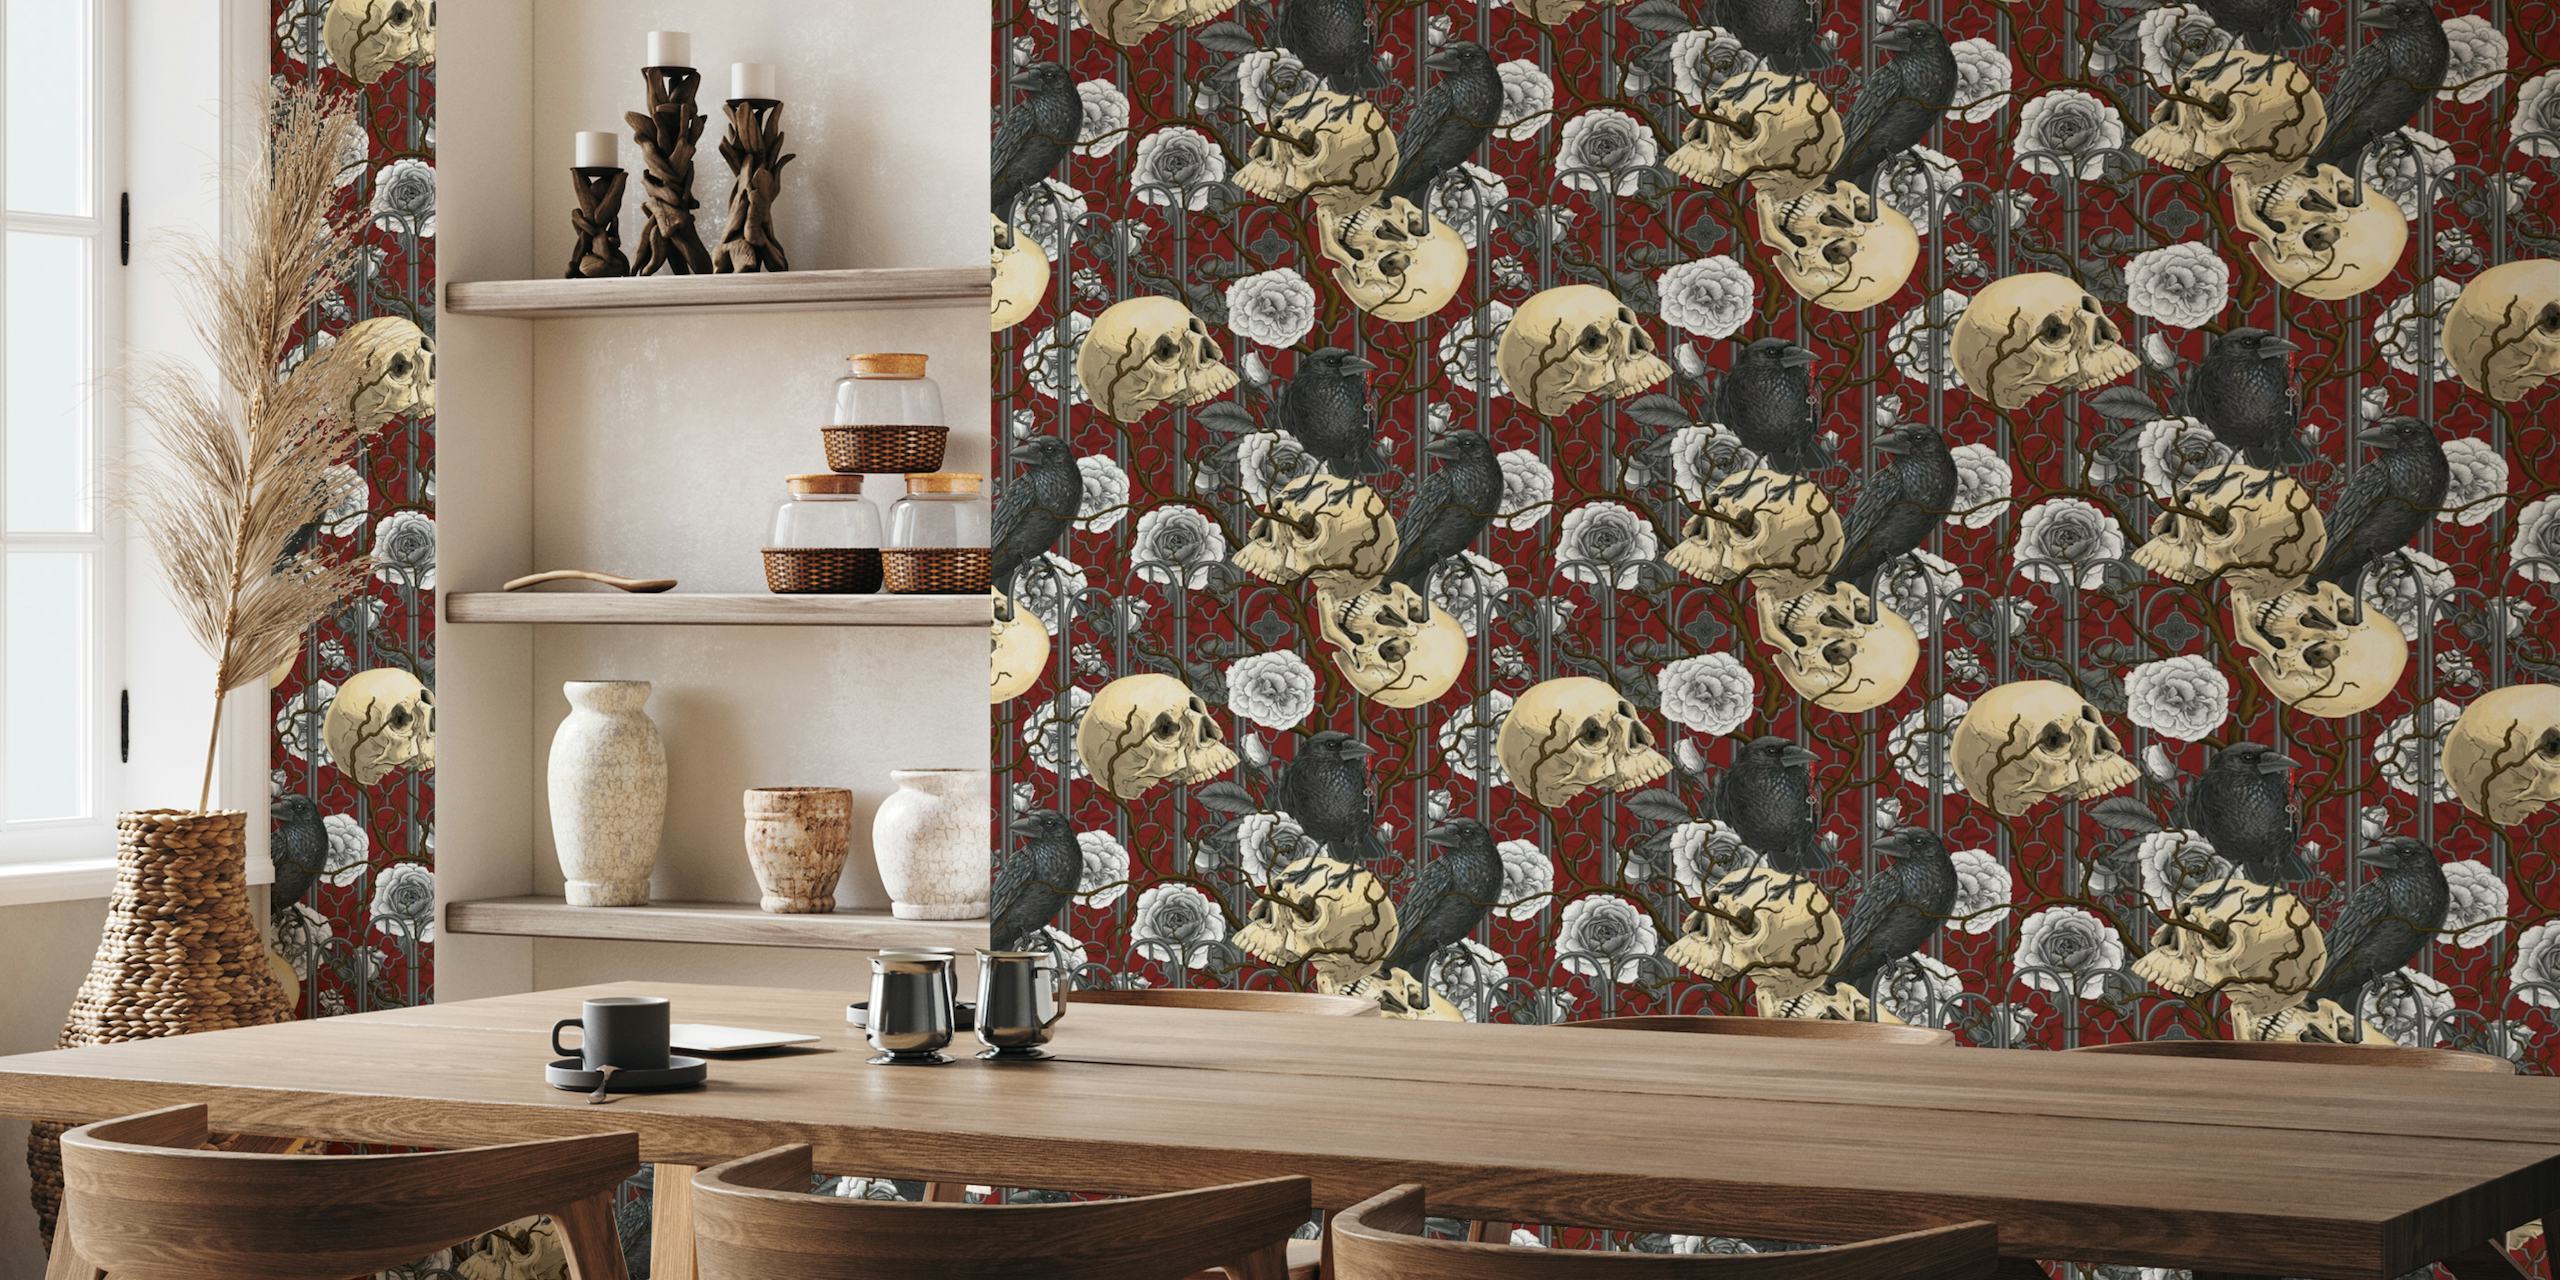 Gothic-inspired wall mural with skulls, roses, and ravens on a red background